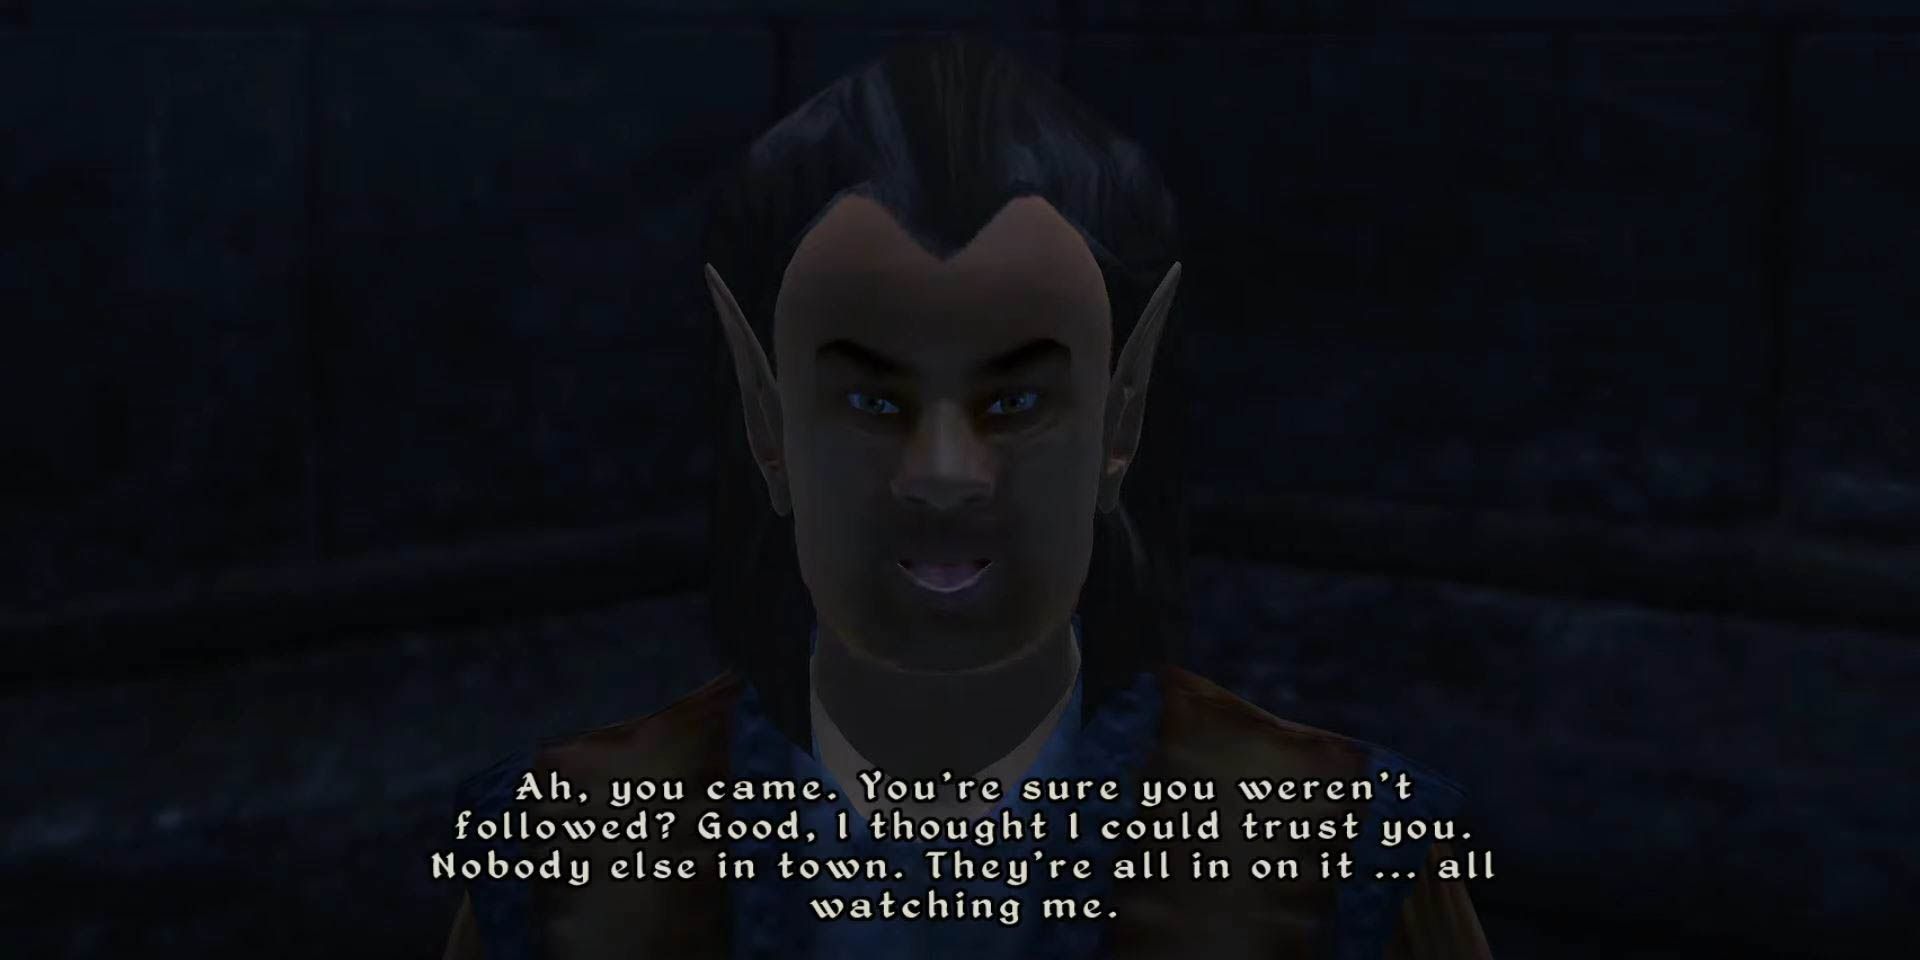 Glarthir, a wood elf in Oblivion, saying "I thought I could trust you. Nobody else in town. They're all in on it. All watching me."